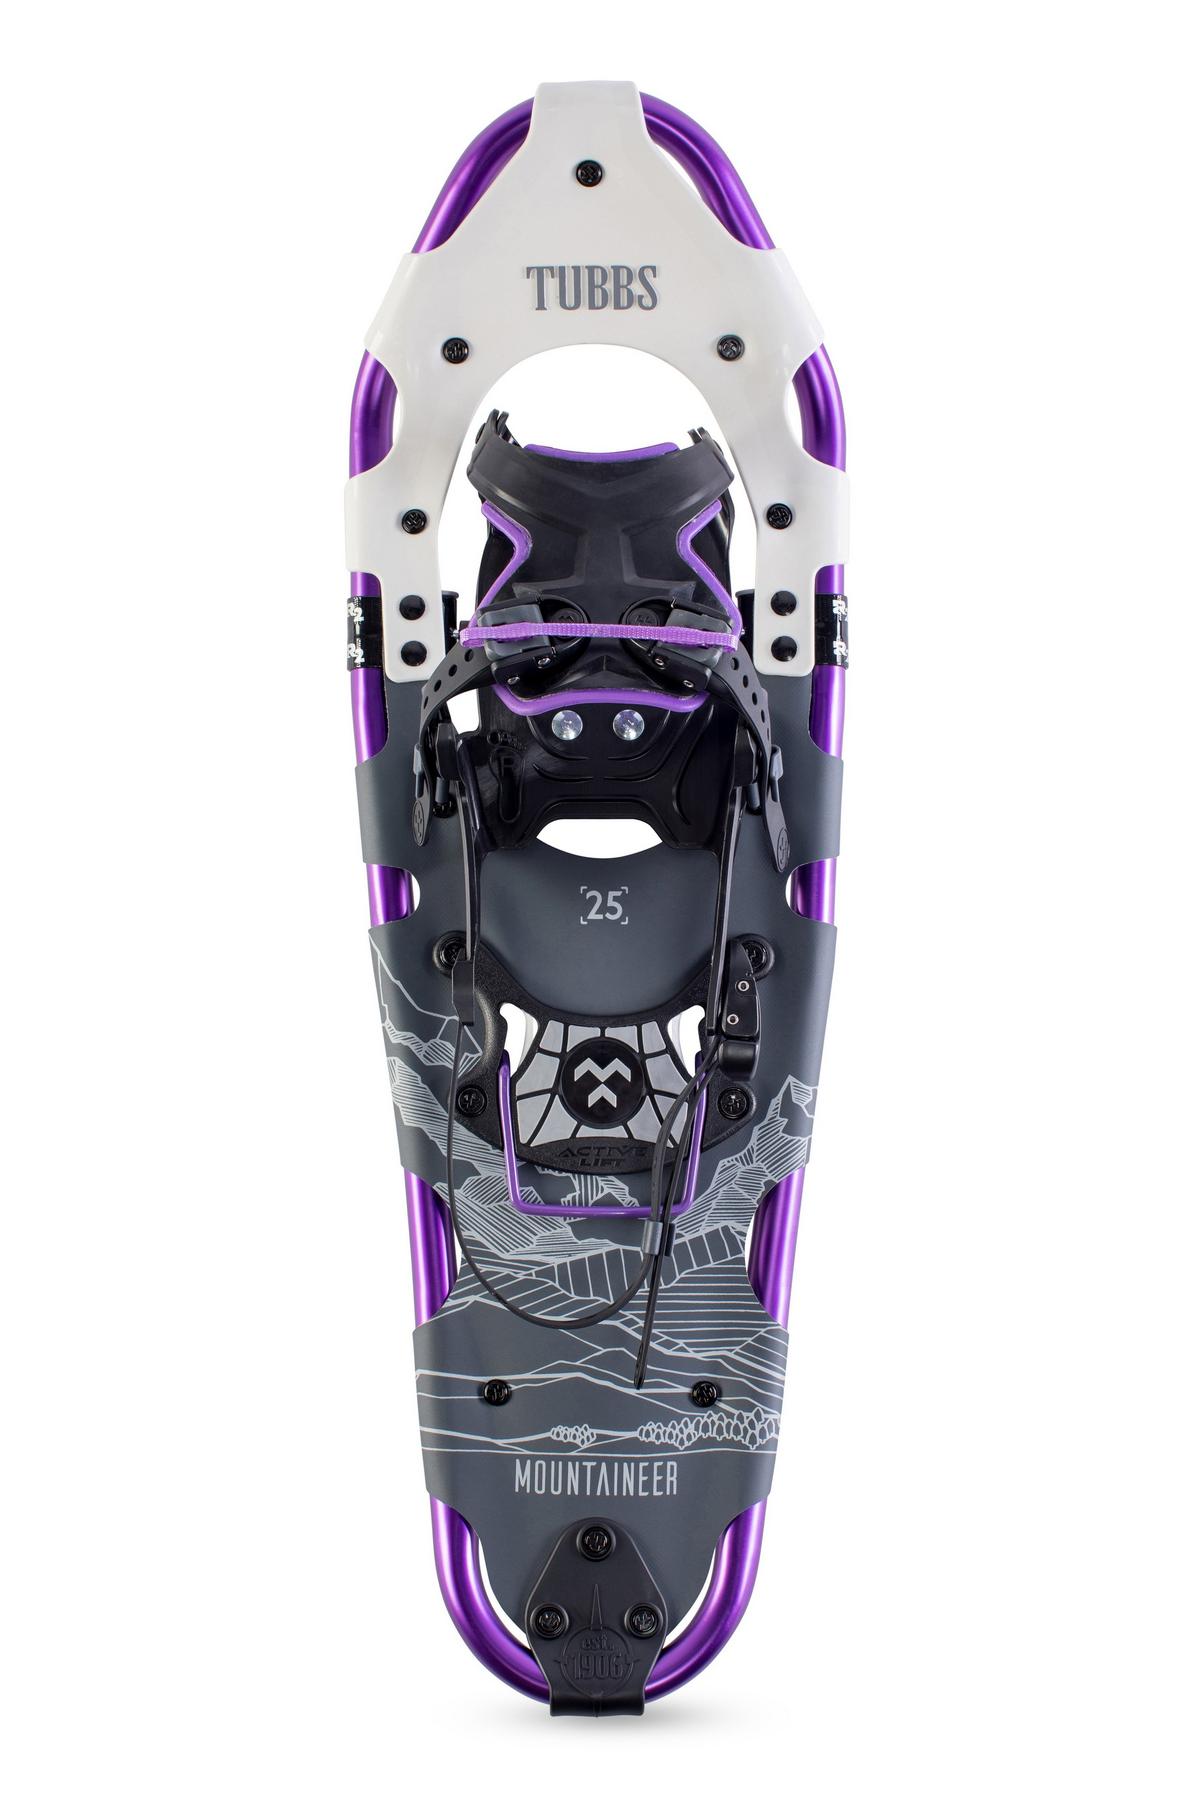 Mountaineer Women's Snowshoes | Tubbs Snowshoes